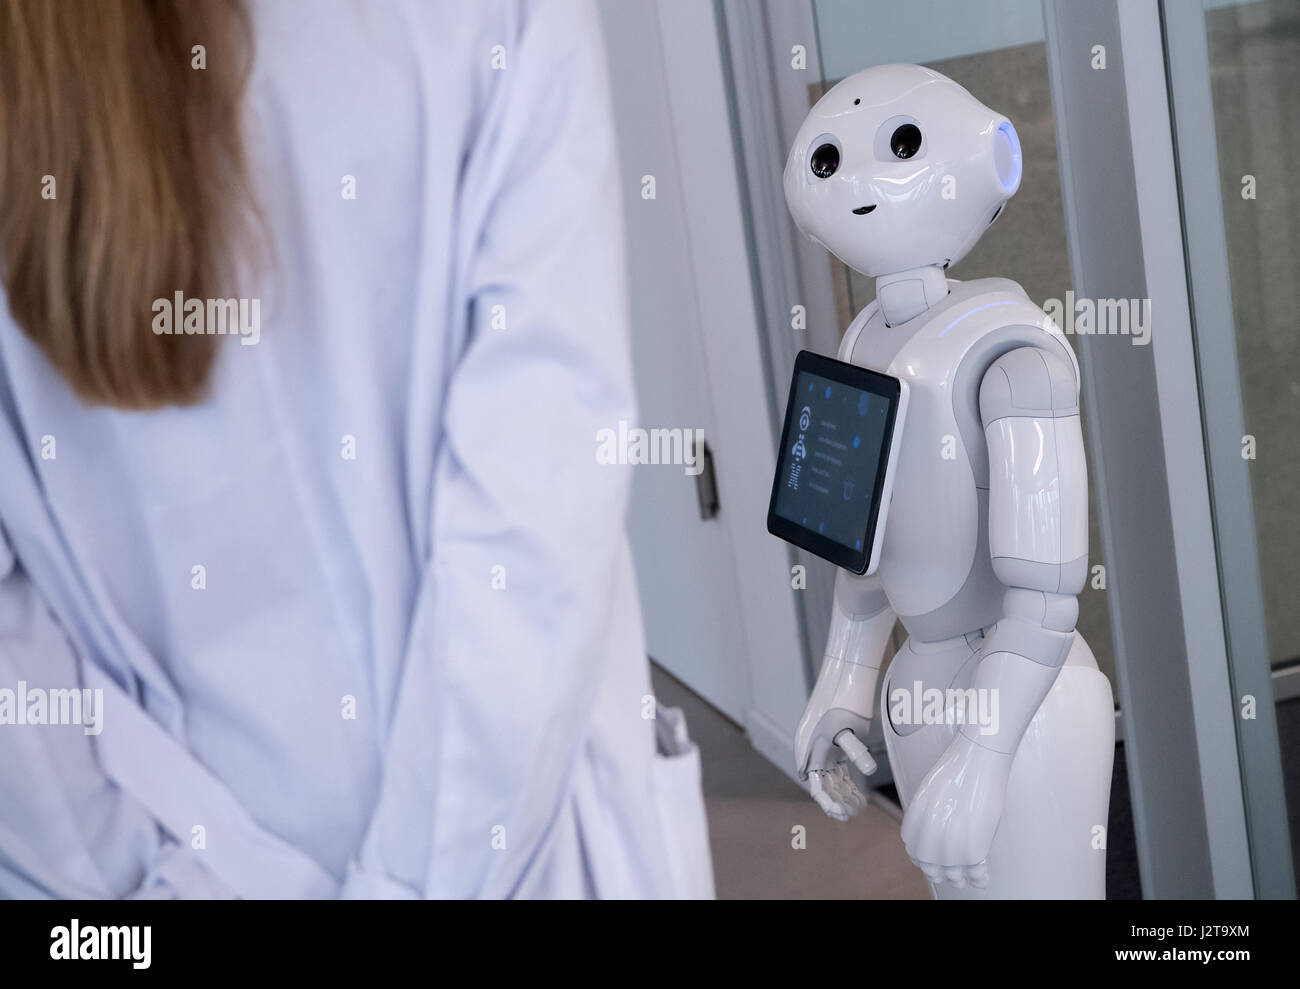 Munich, Germany. 26th Apr, 2017. The robot 'Pepper' can be seen at a showroom in the headquarters of IBM in Munich, Germany, 26 April 2017. Pepper is a humanoid robot programmed to analyse people's facial expressions and gestures. Photo: Sven Hoppe/dpa/Alamy Live News Stock Photo